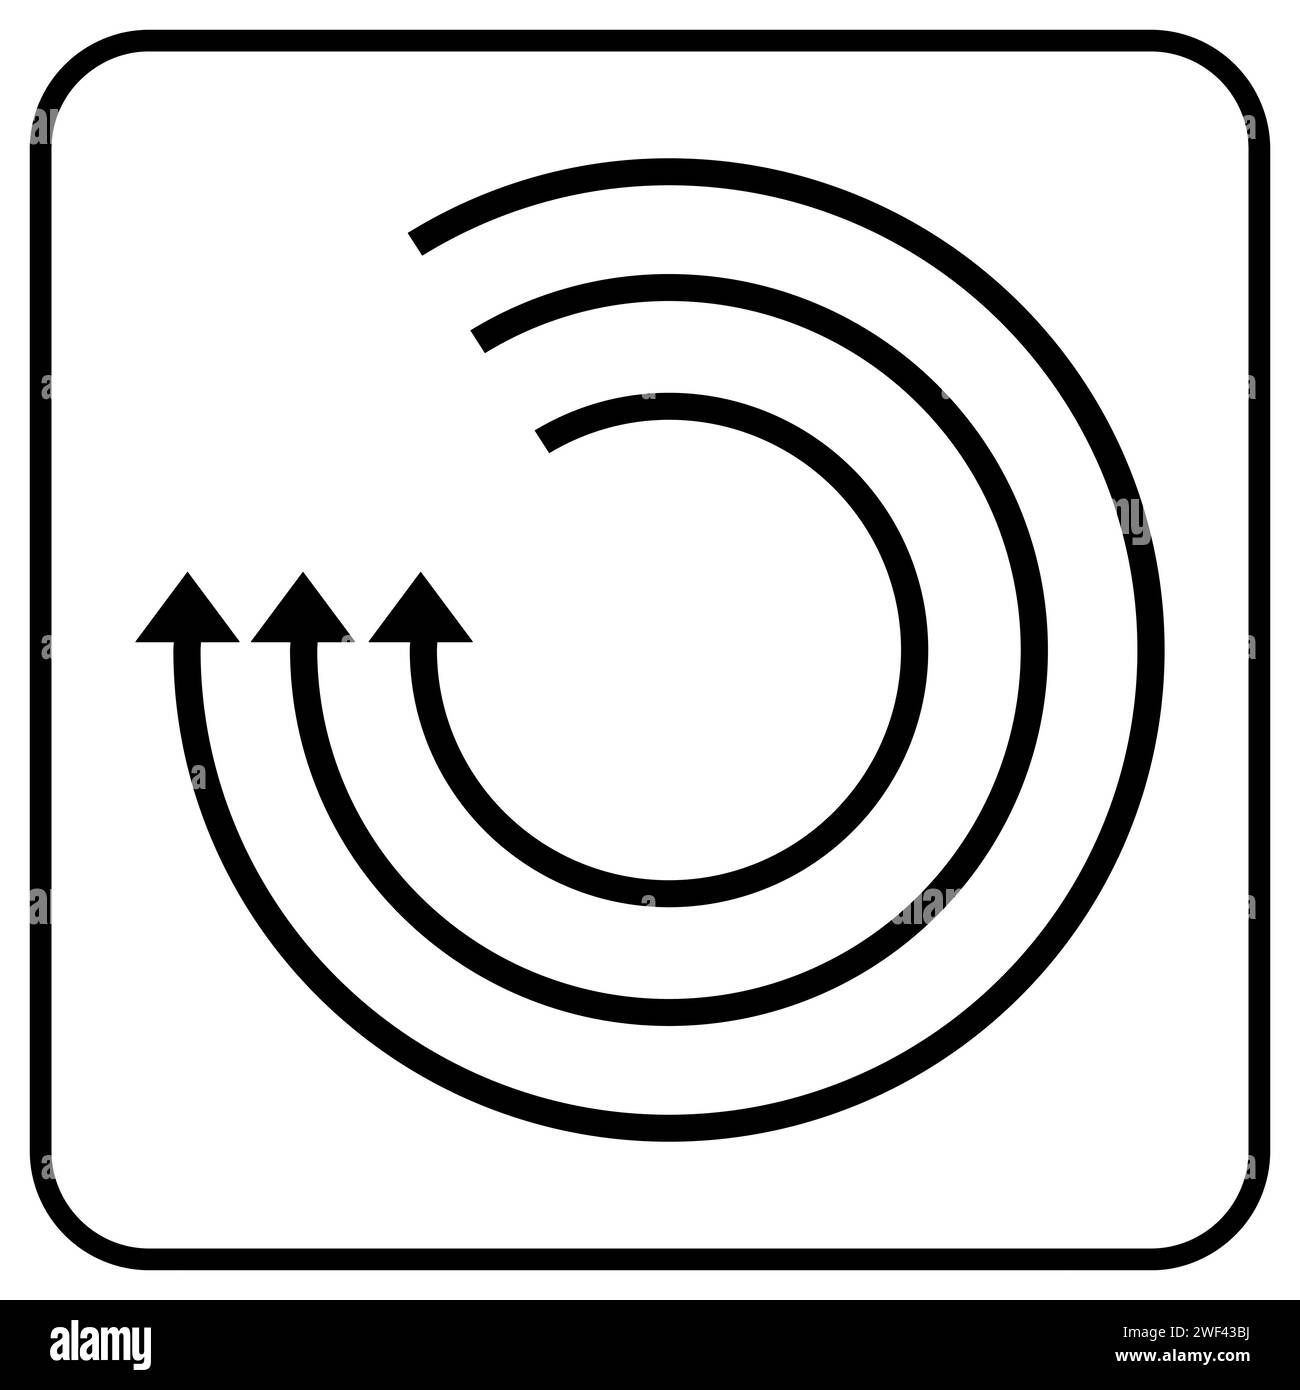 Car rotary polisher vector icon for webb or app button. Car body repair and detailing workshop. polishing vehicle paint. Stock Vector